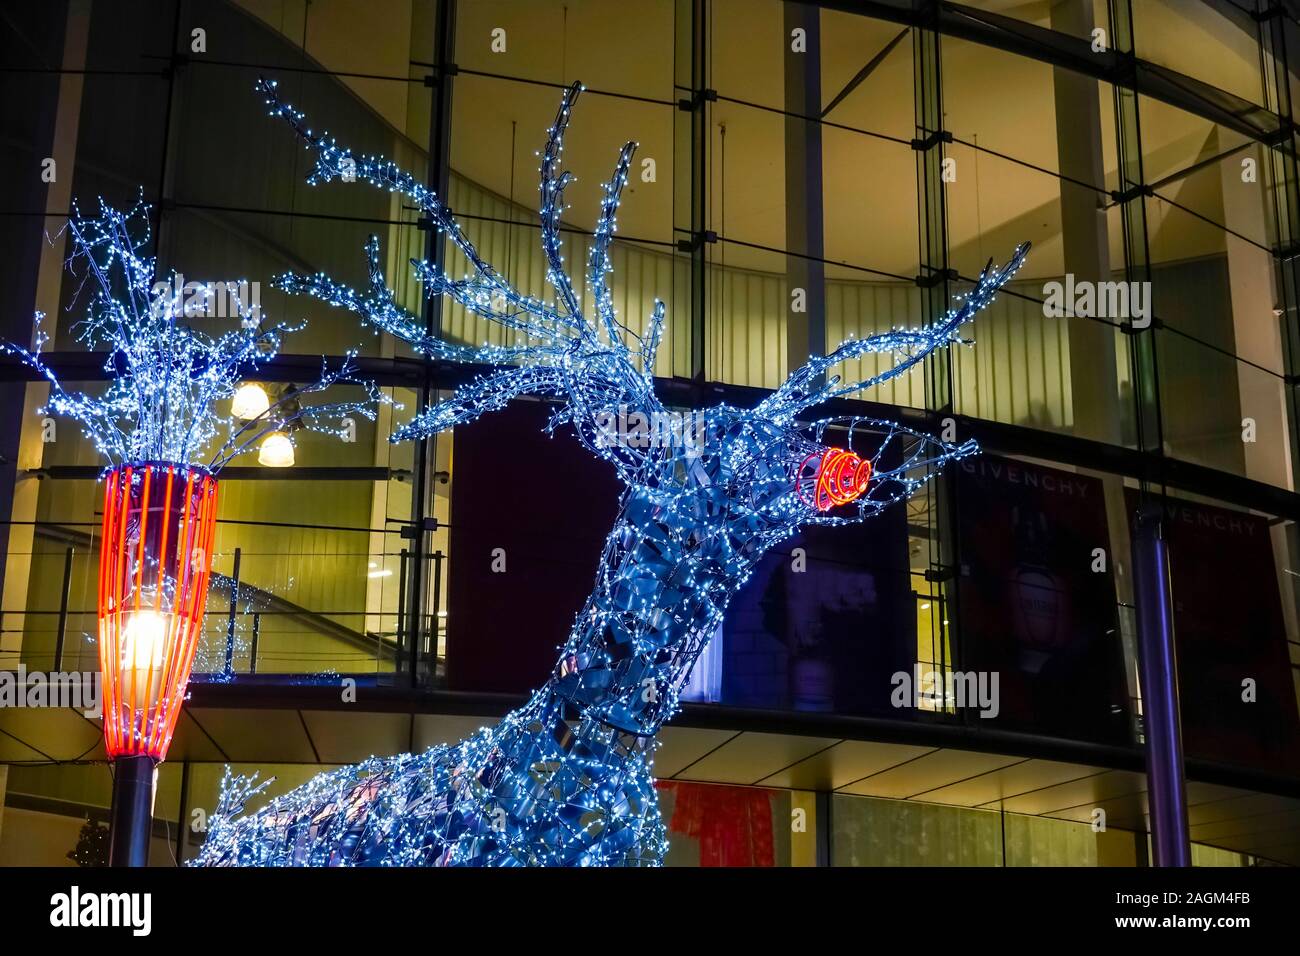 Lighted silver sculpture of Rudolph the Red-Nosed Reindeer in Liverpool Stock Photo